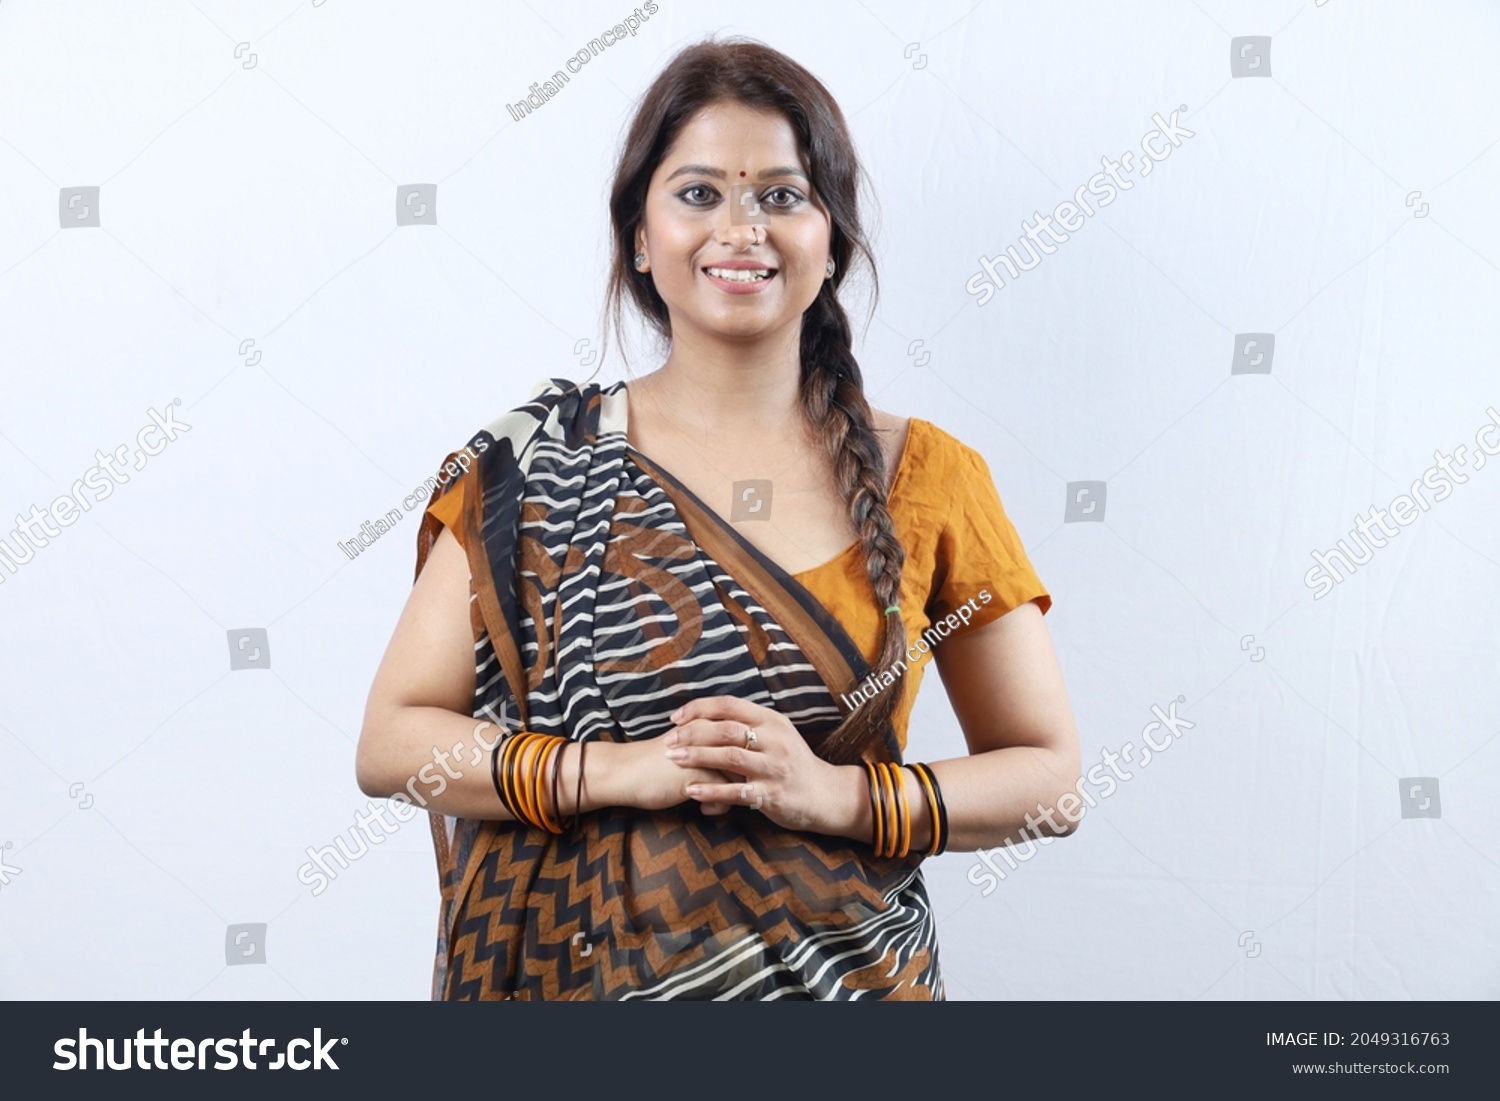 Young rural happy Indian woman wearing a saree portraying various expressions of the village girl. She is portraying various moods of cheerful rural life in white background. #2049316763